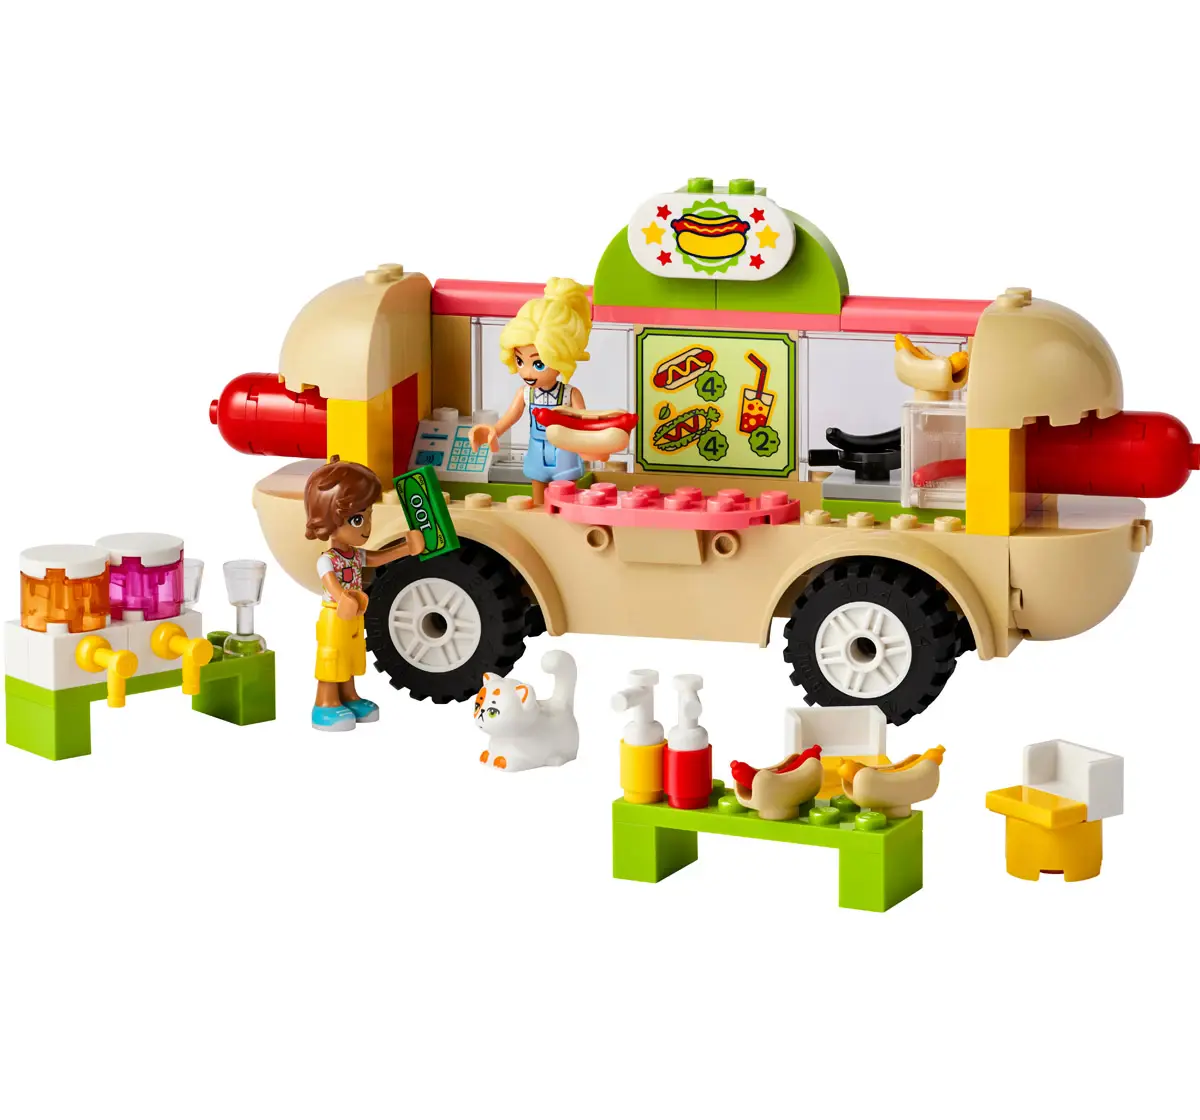 Lego Friends Hot Dog Food Truck Toy 42633 Multicolour For Kids Ages 4Y+ (100 Pieces) 